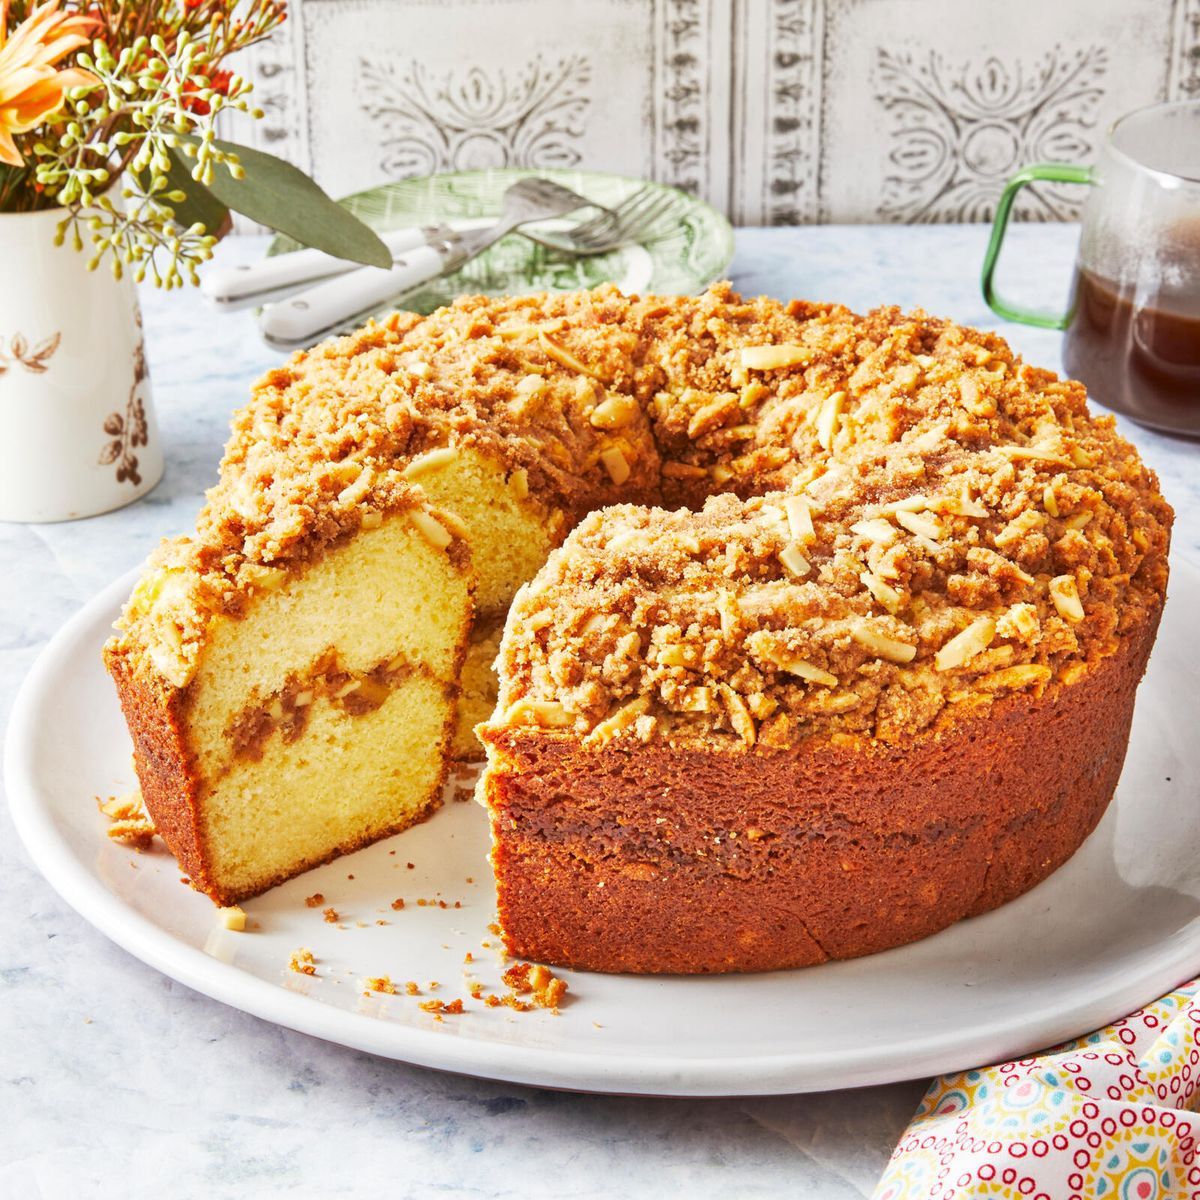 50 Best Fall Cake Ideas - Cake Recipes for Fall